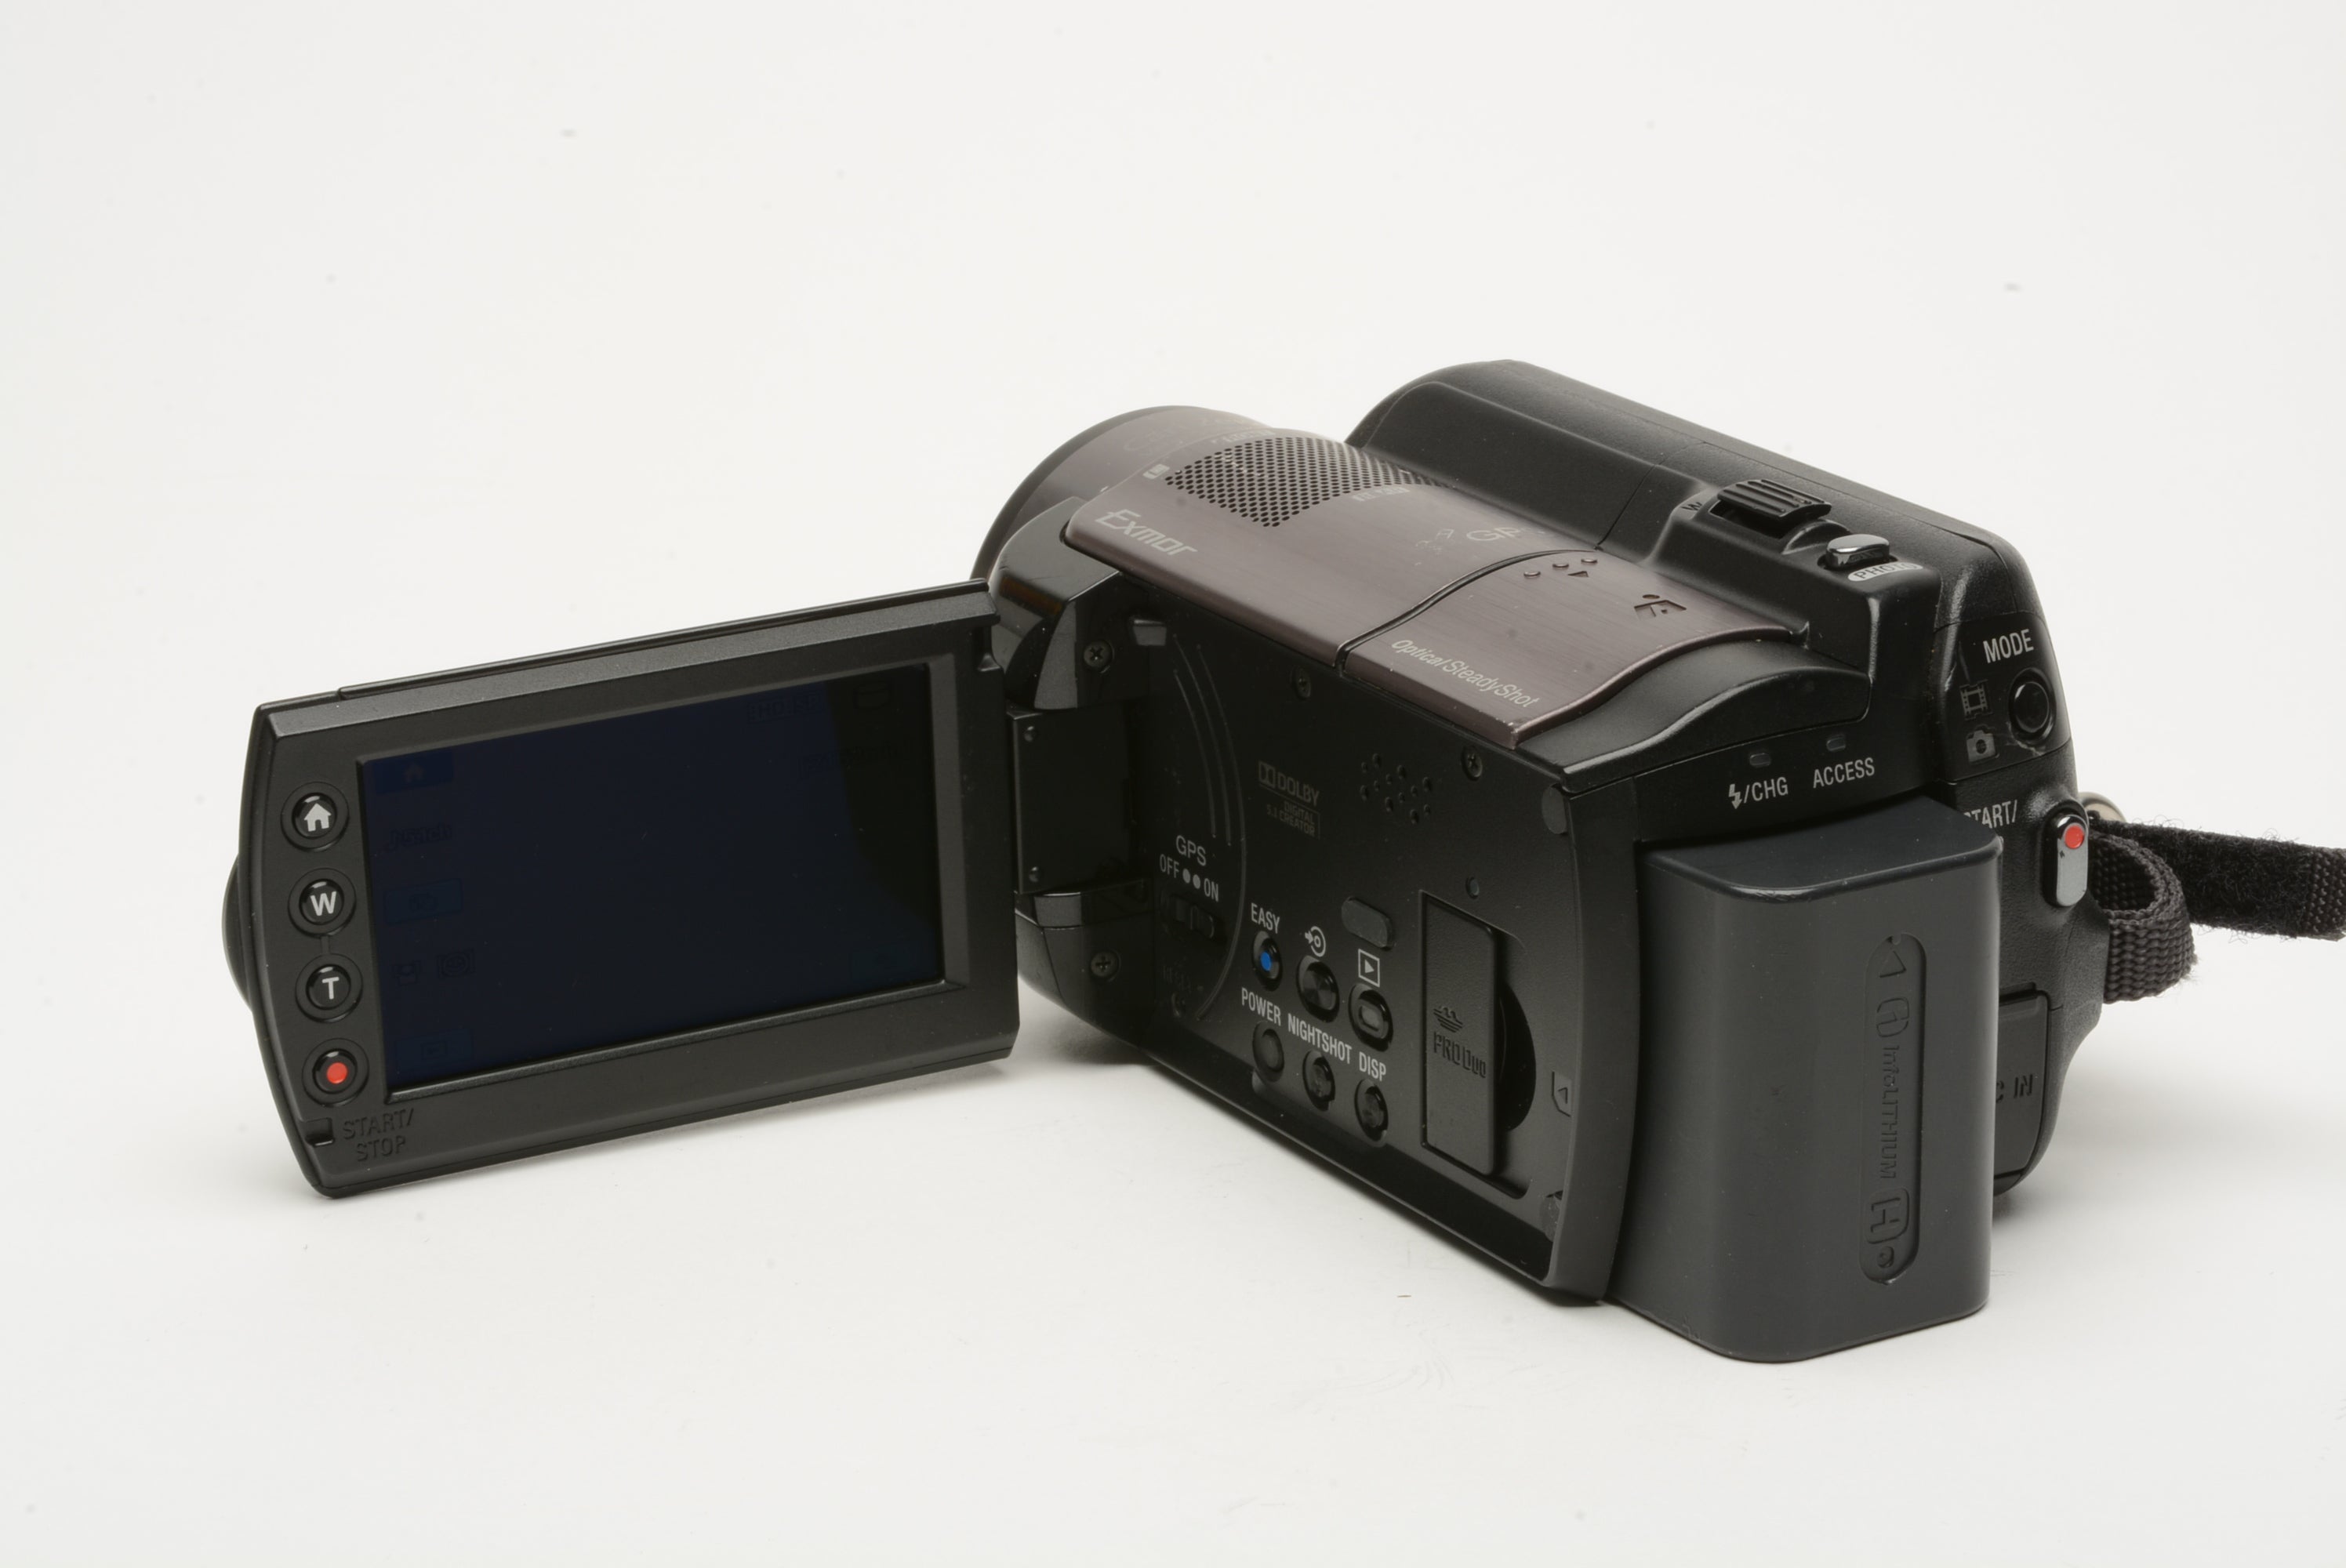 Sony HDR-XR200 120GB HDD video camcorder, 2batts, AC/charger